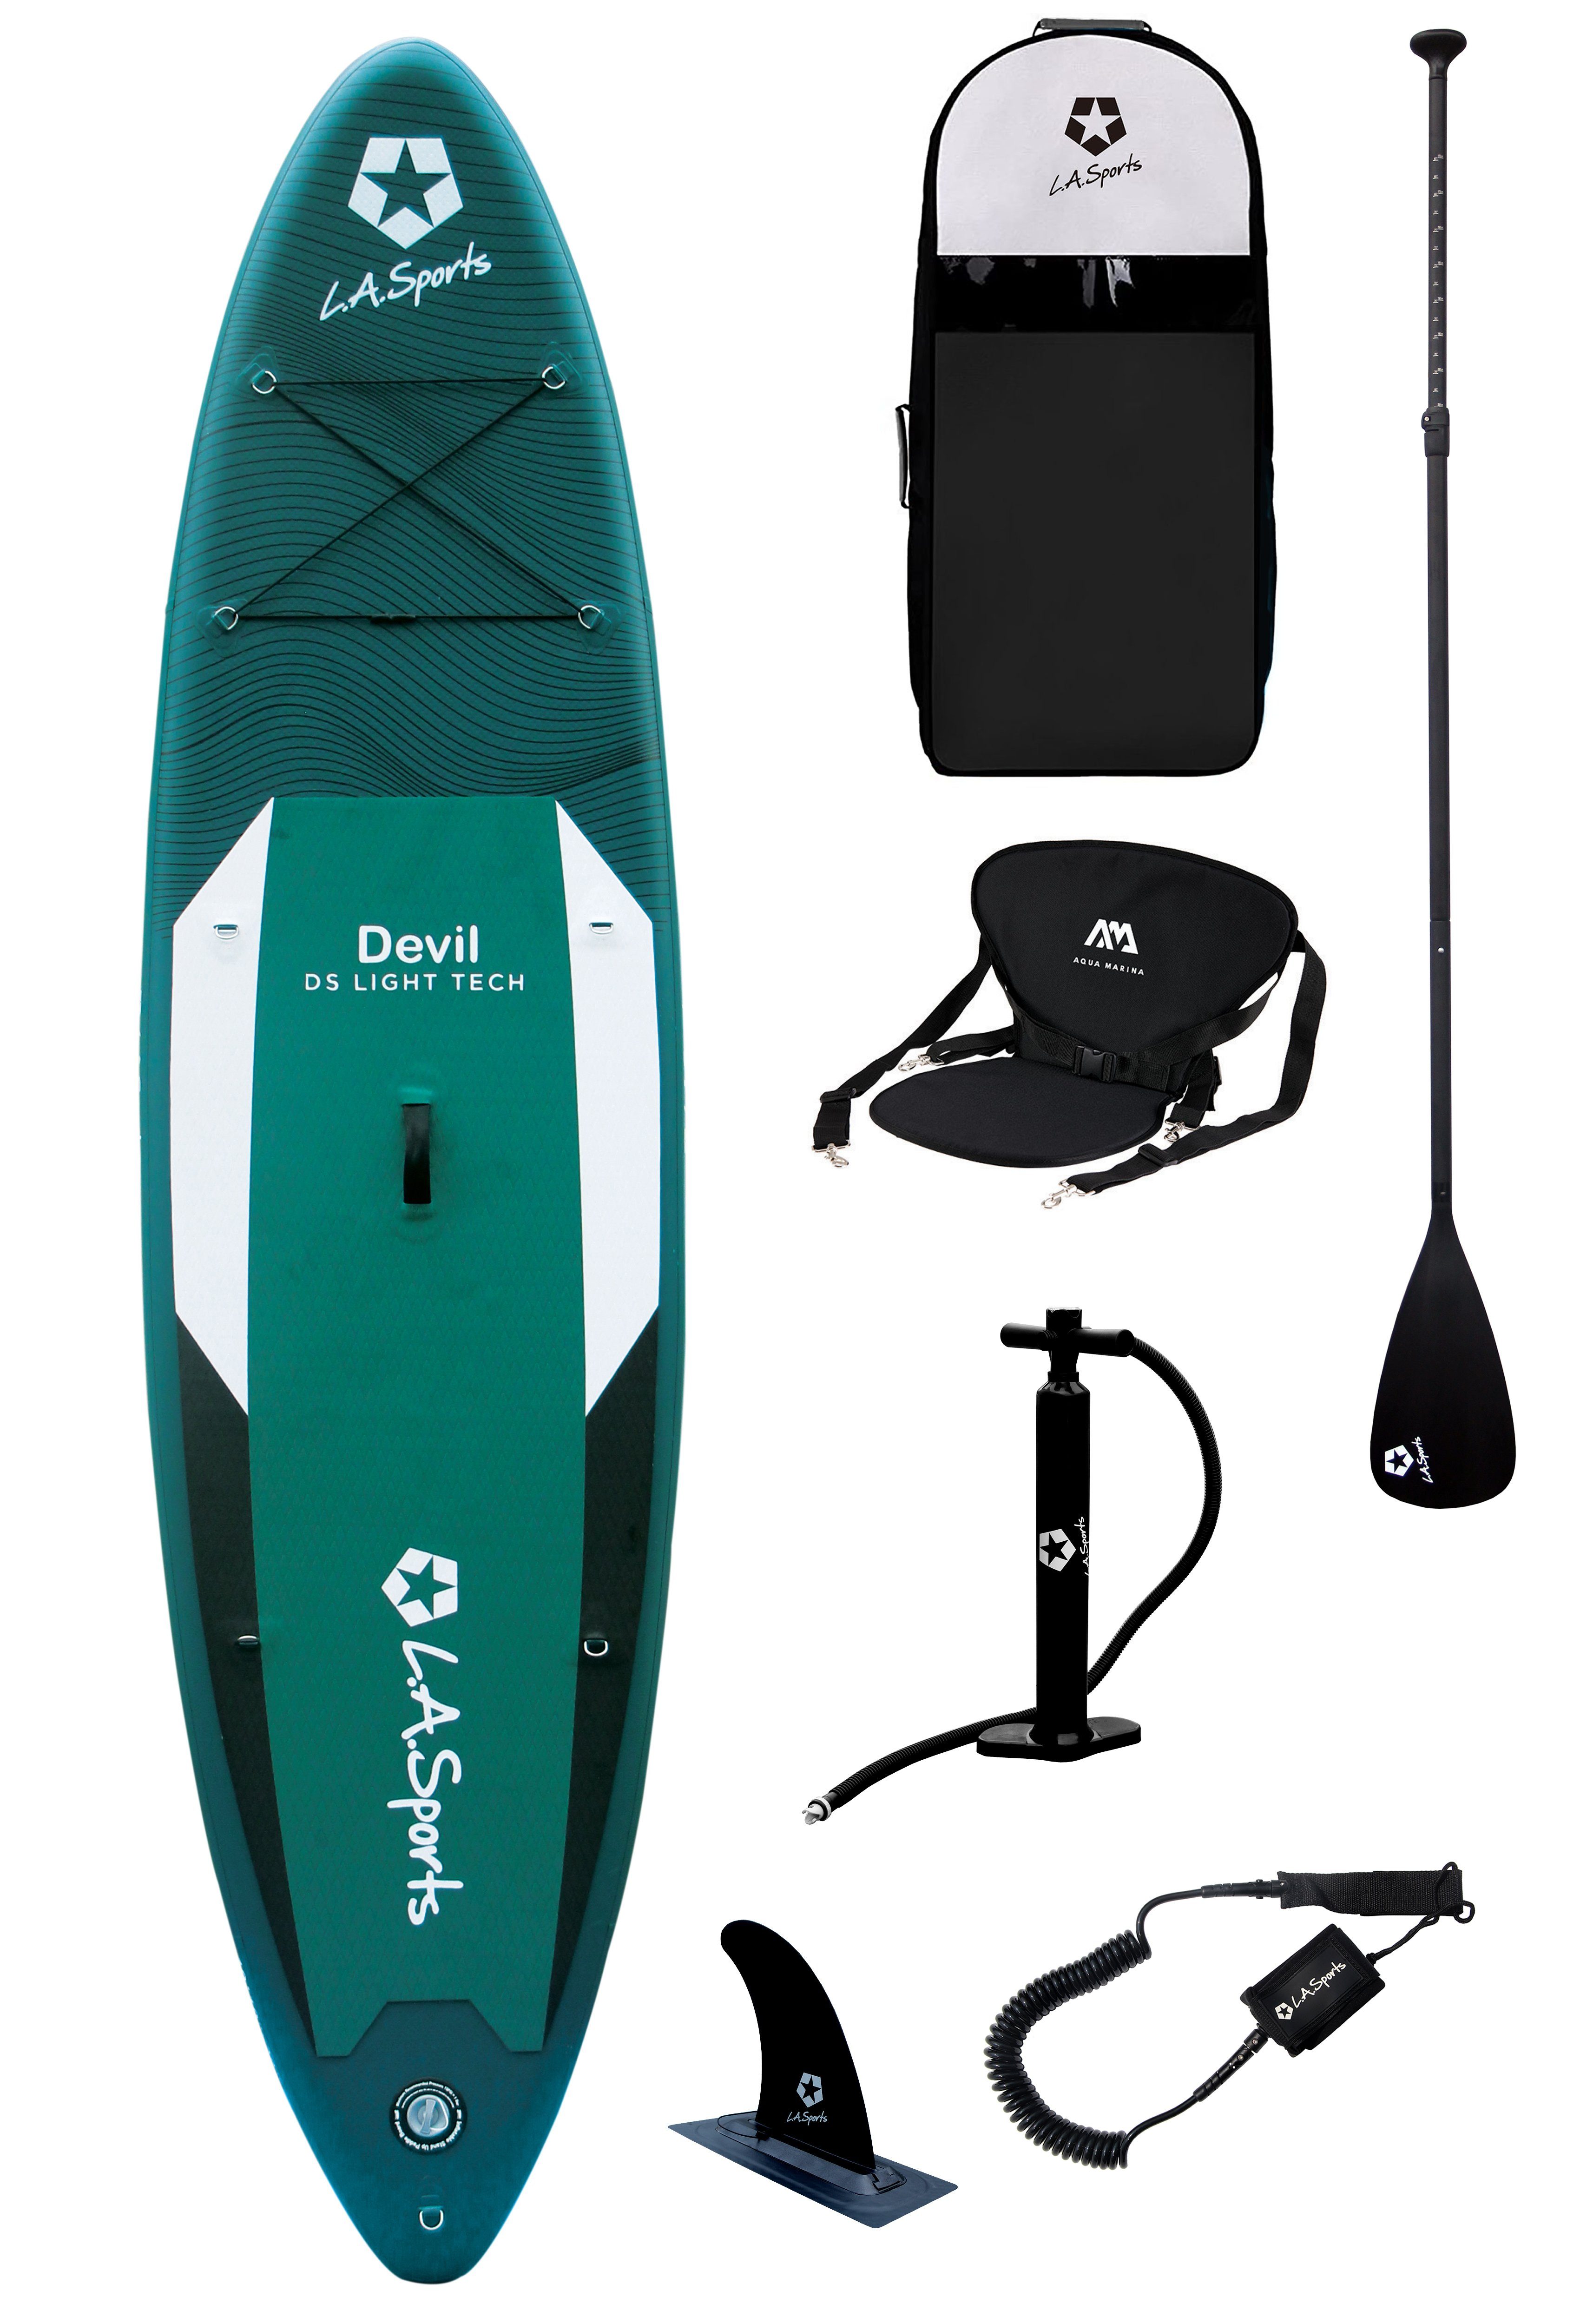 L.A. Sports 330 & mit Jugendliche SUP SUP Spinera Stand-Up Board Paddle cm, mit Allround Stand Paddeling Sitz Sitz), Classic & ALU Set Devil Inflatable SUP-Board Board, für (Set, Paddel Up 10.1”